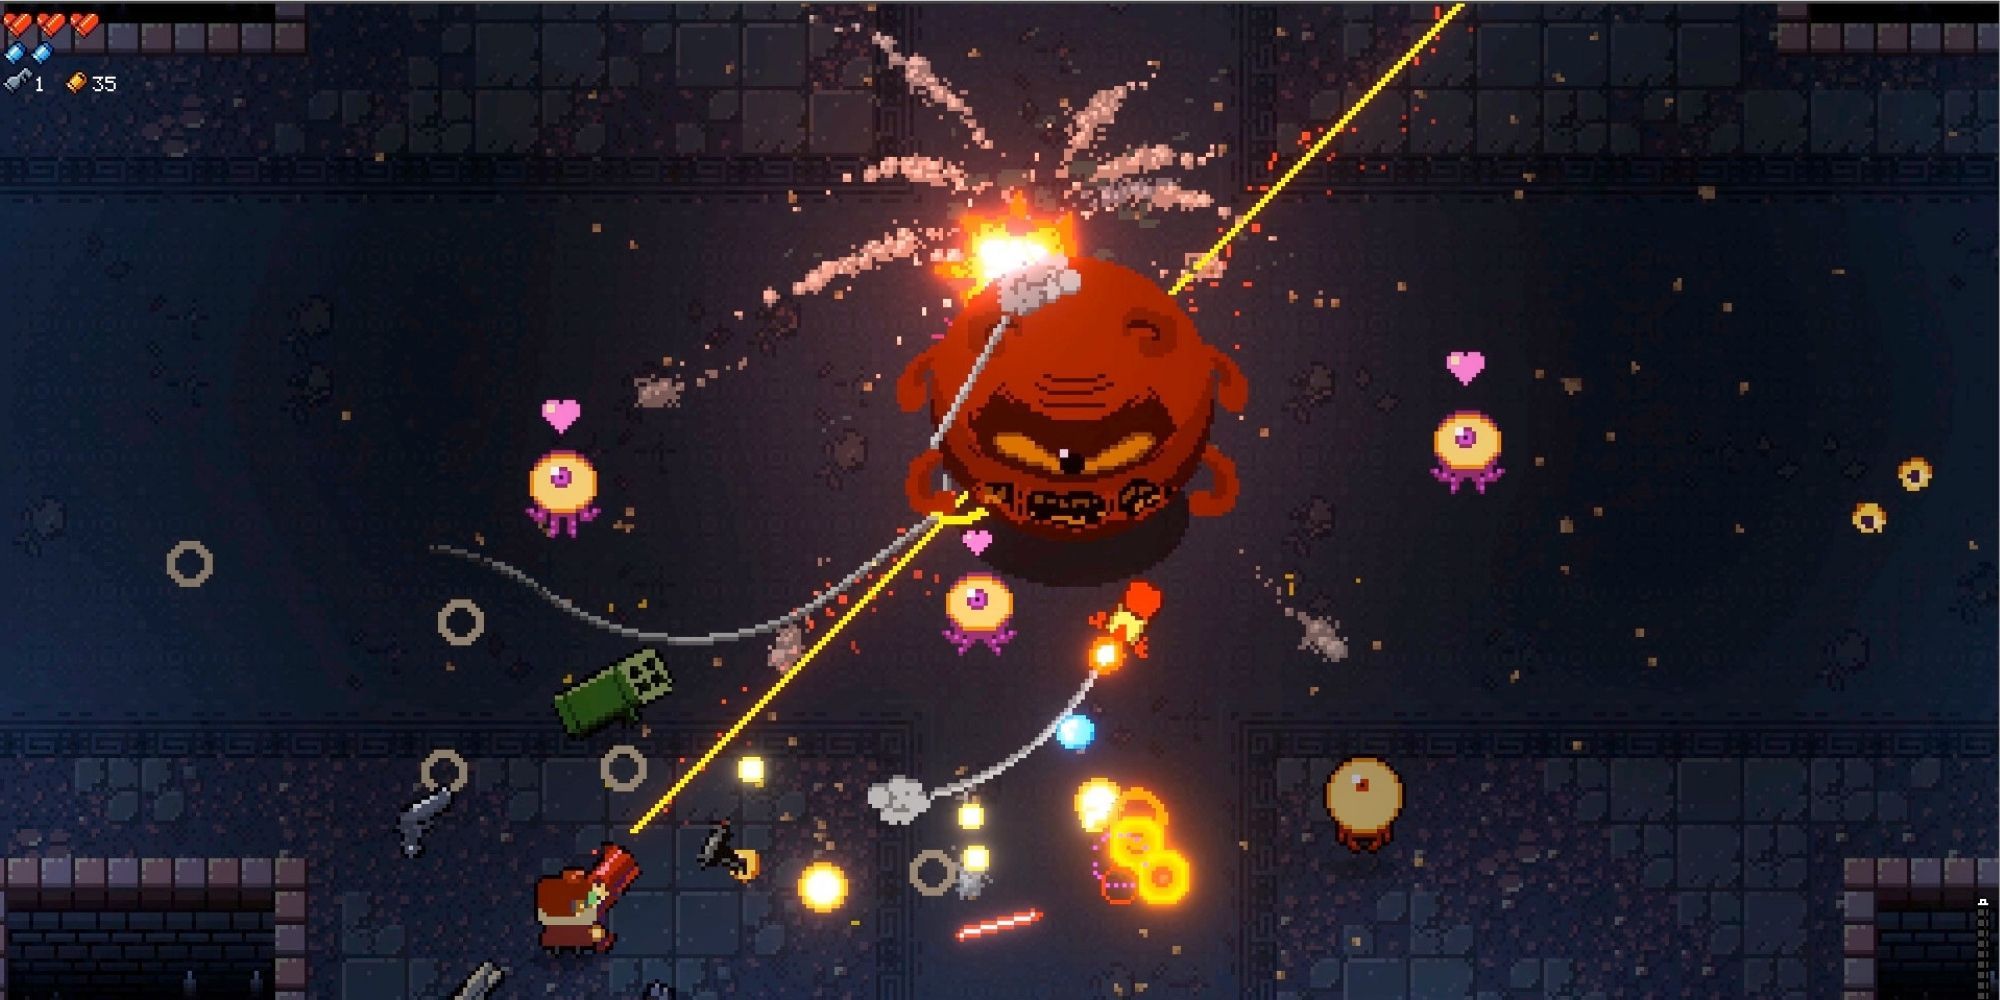 Enter the Gungeon bullet-hell sequence